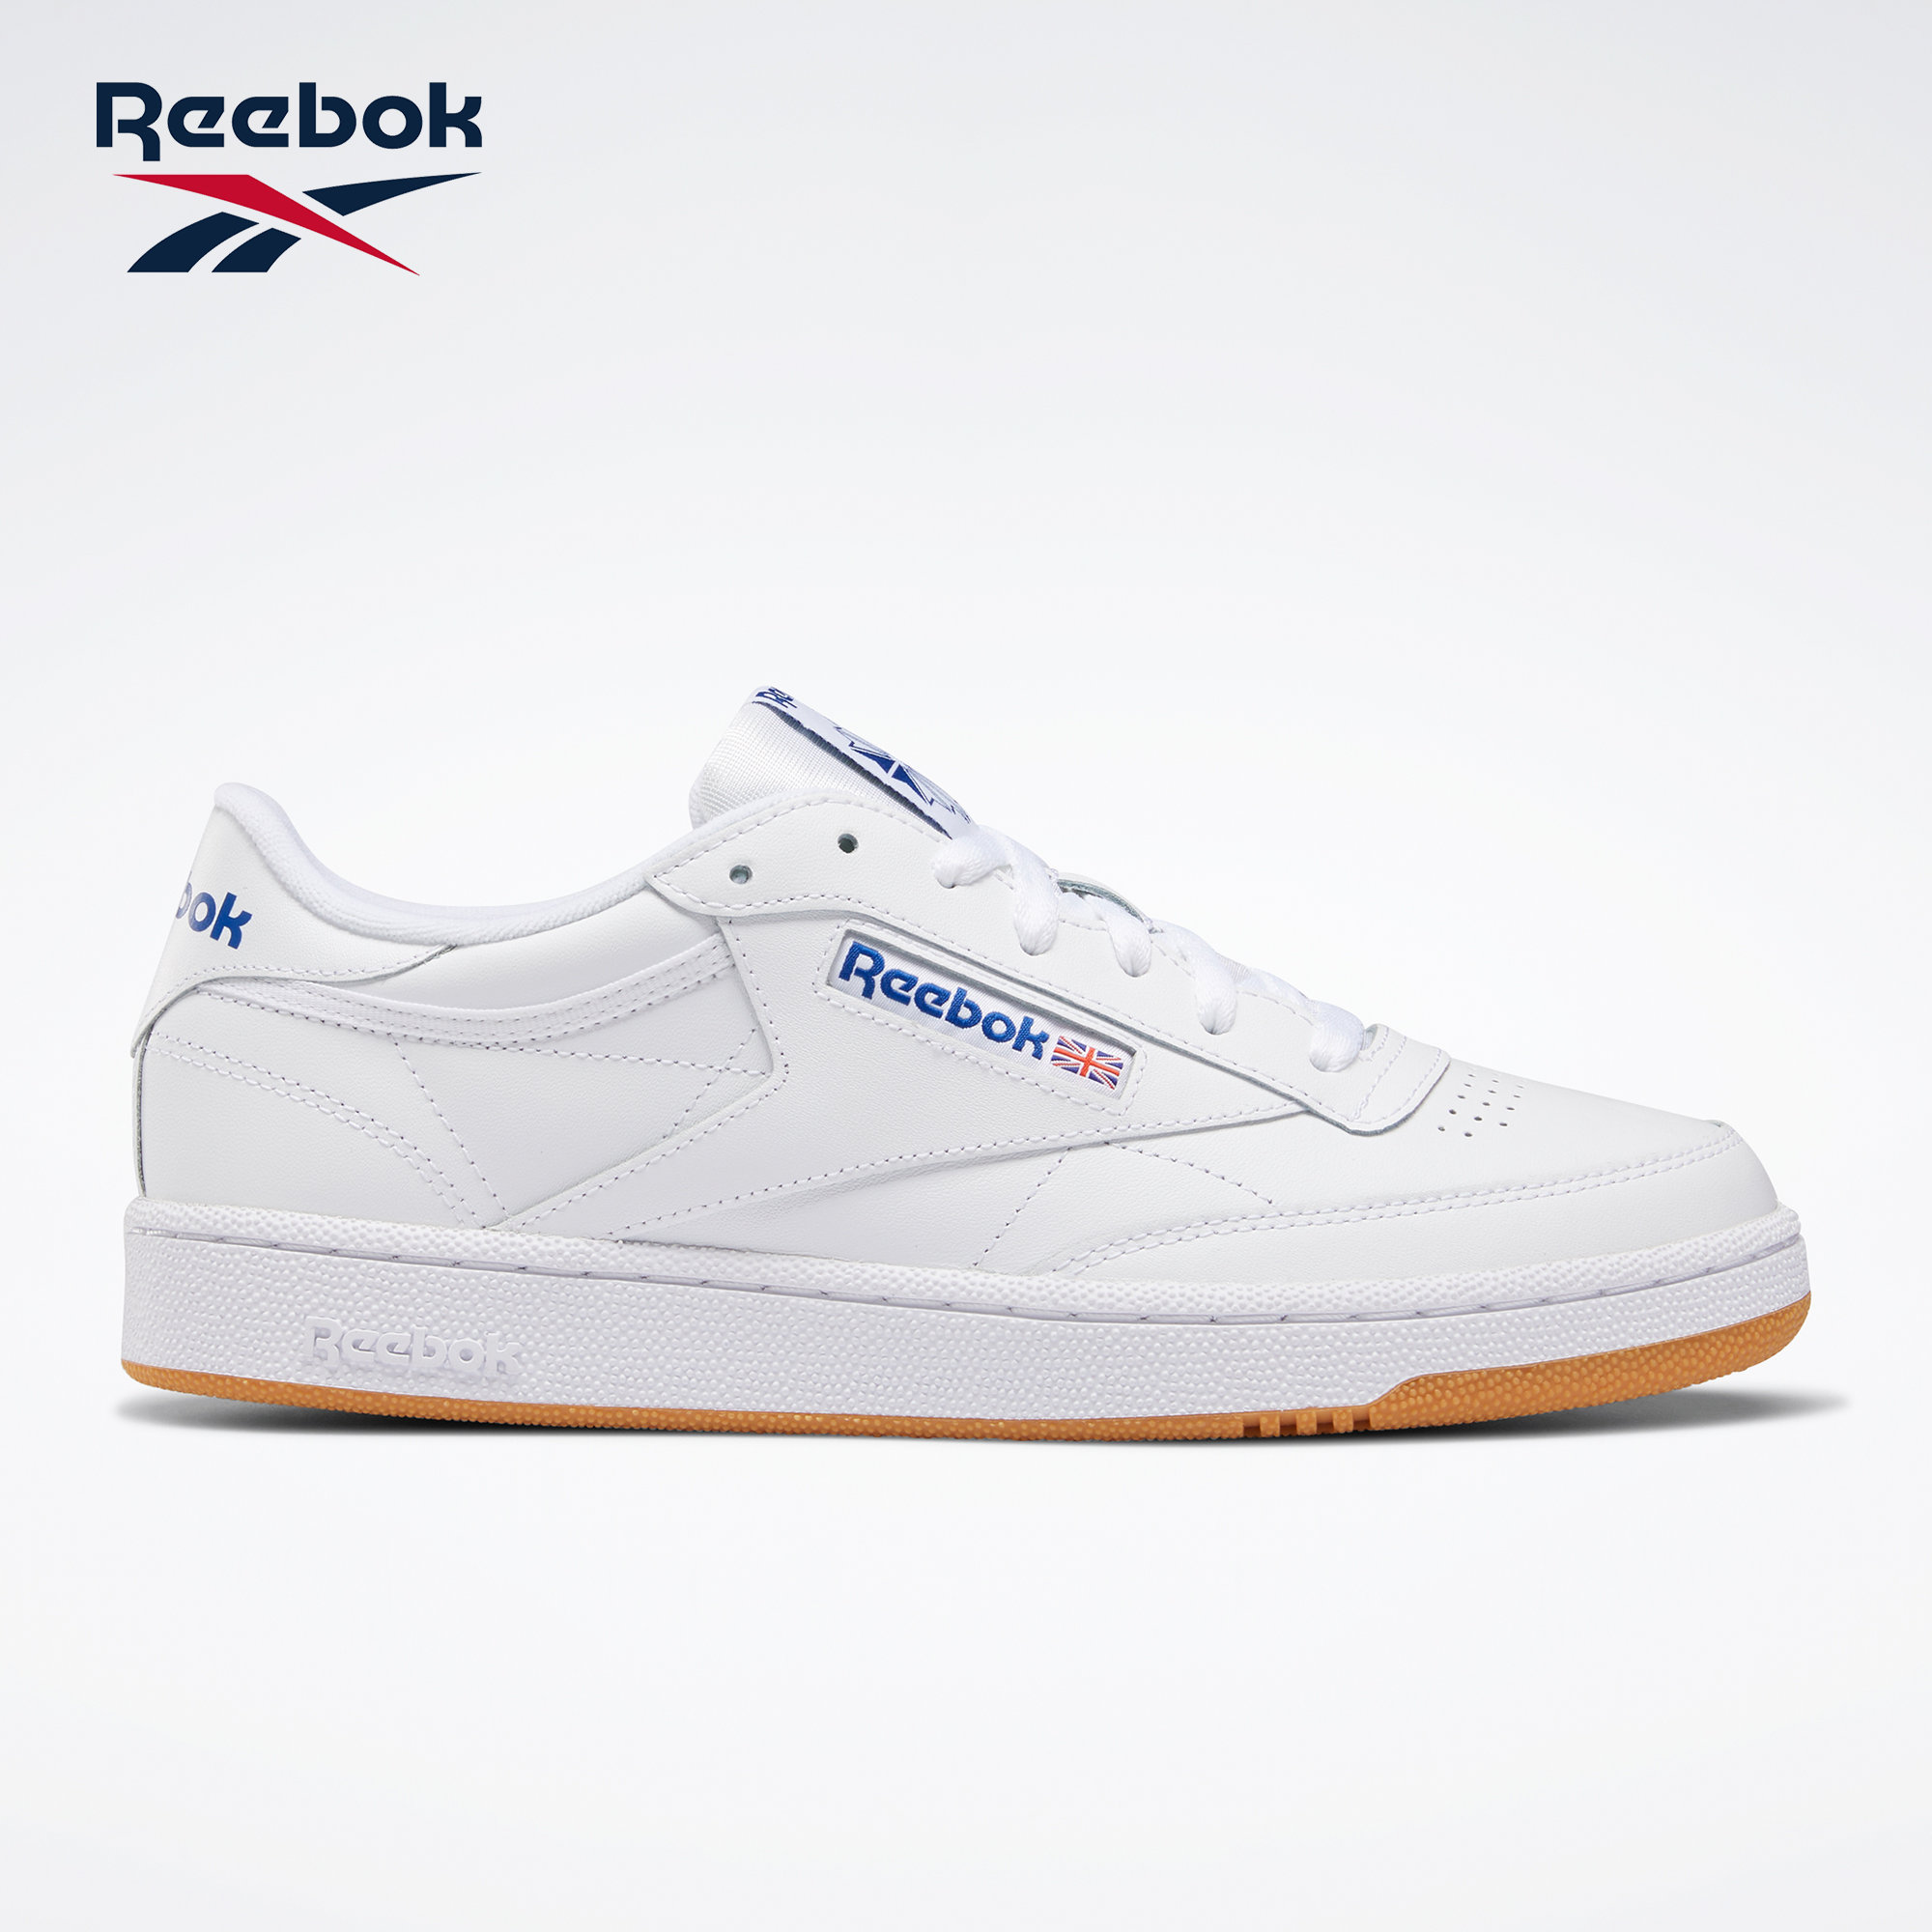 reebok shoes models with price philippines